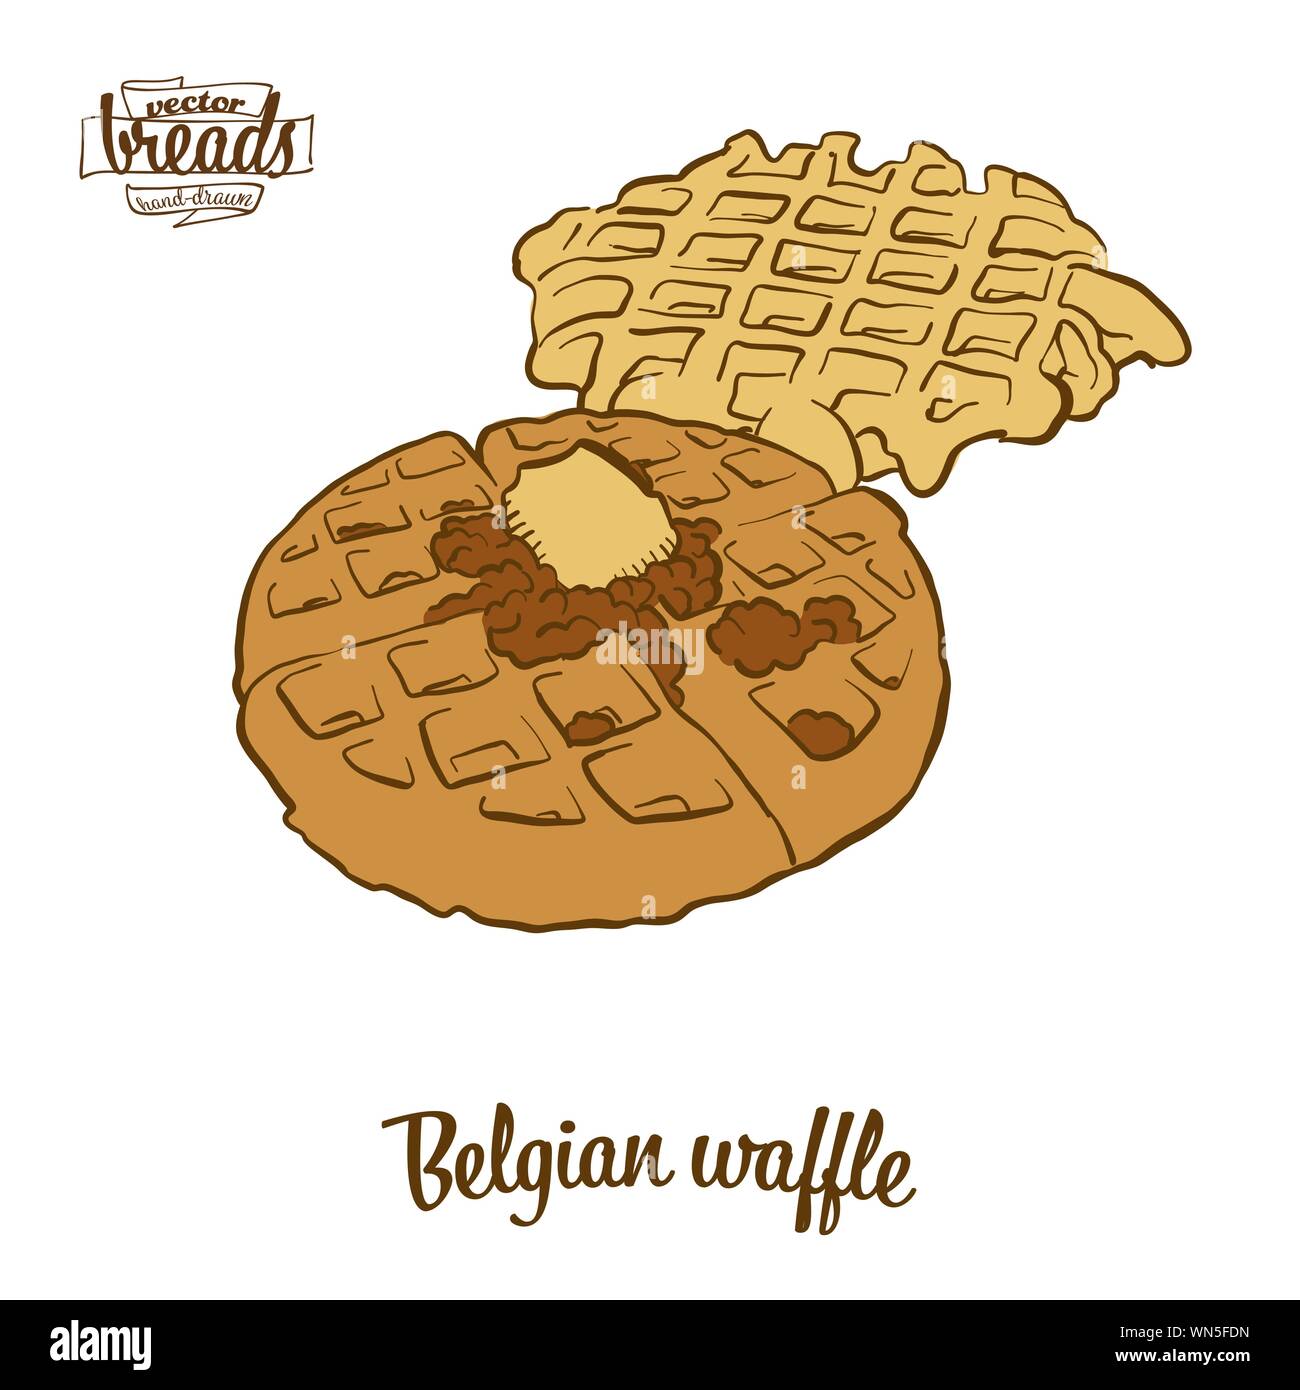 Colored Drawing Of Belgian Waffle Bread Vector Illustration Of Waffle Food Usually Known In Belgium Colored Bread Sketches Stock Vector Image Art Alamy